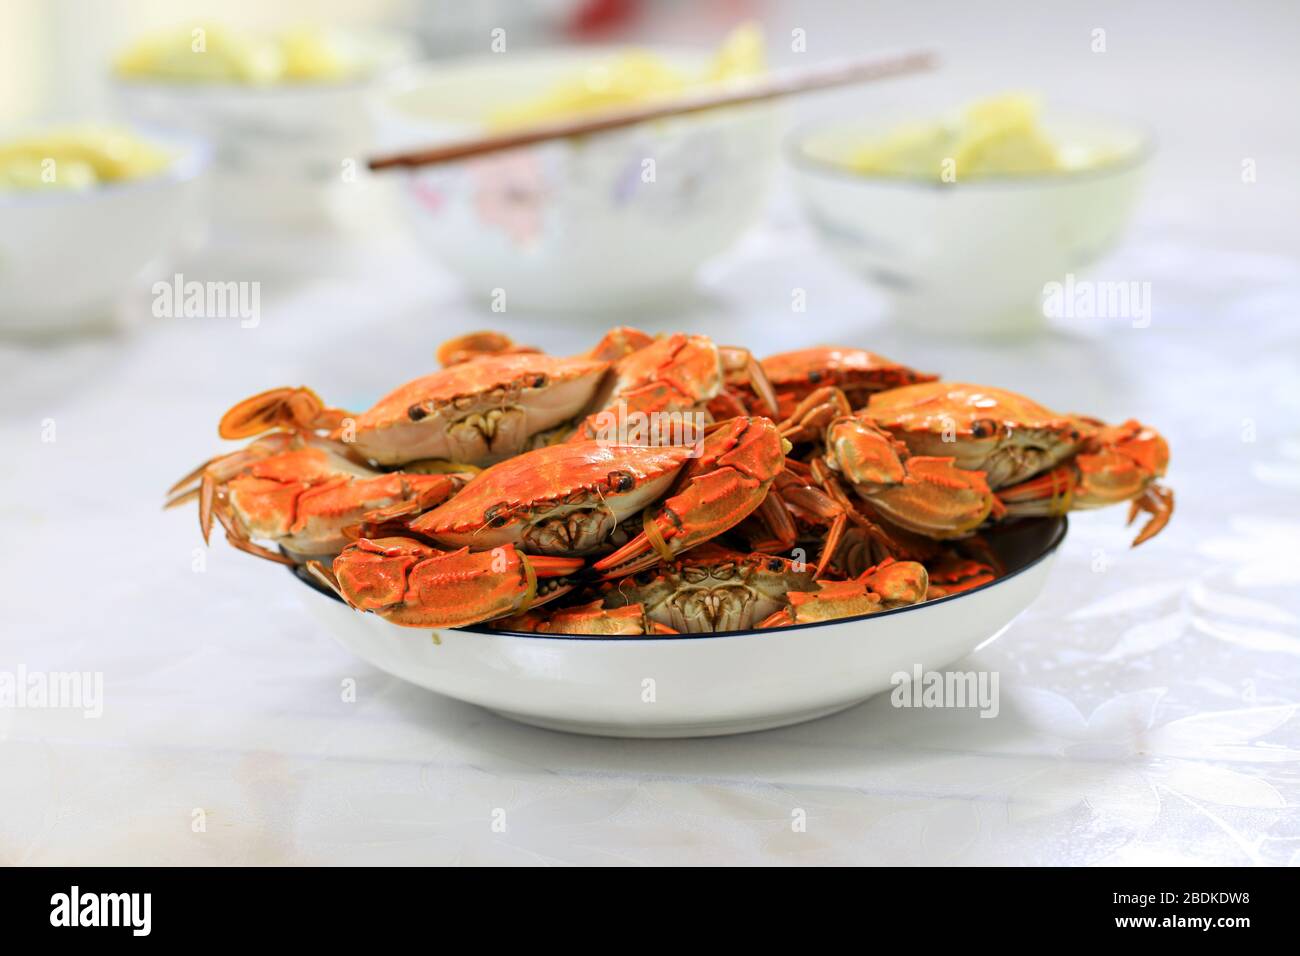 The crab is on the table Stock Photo